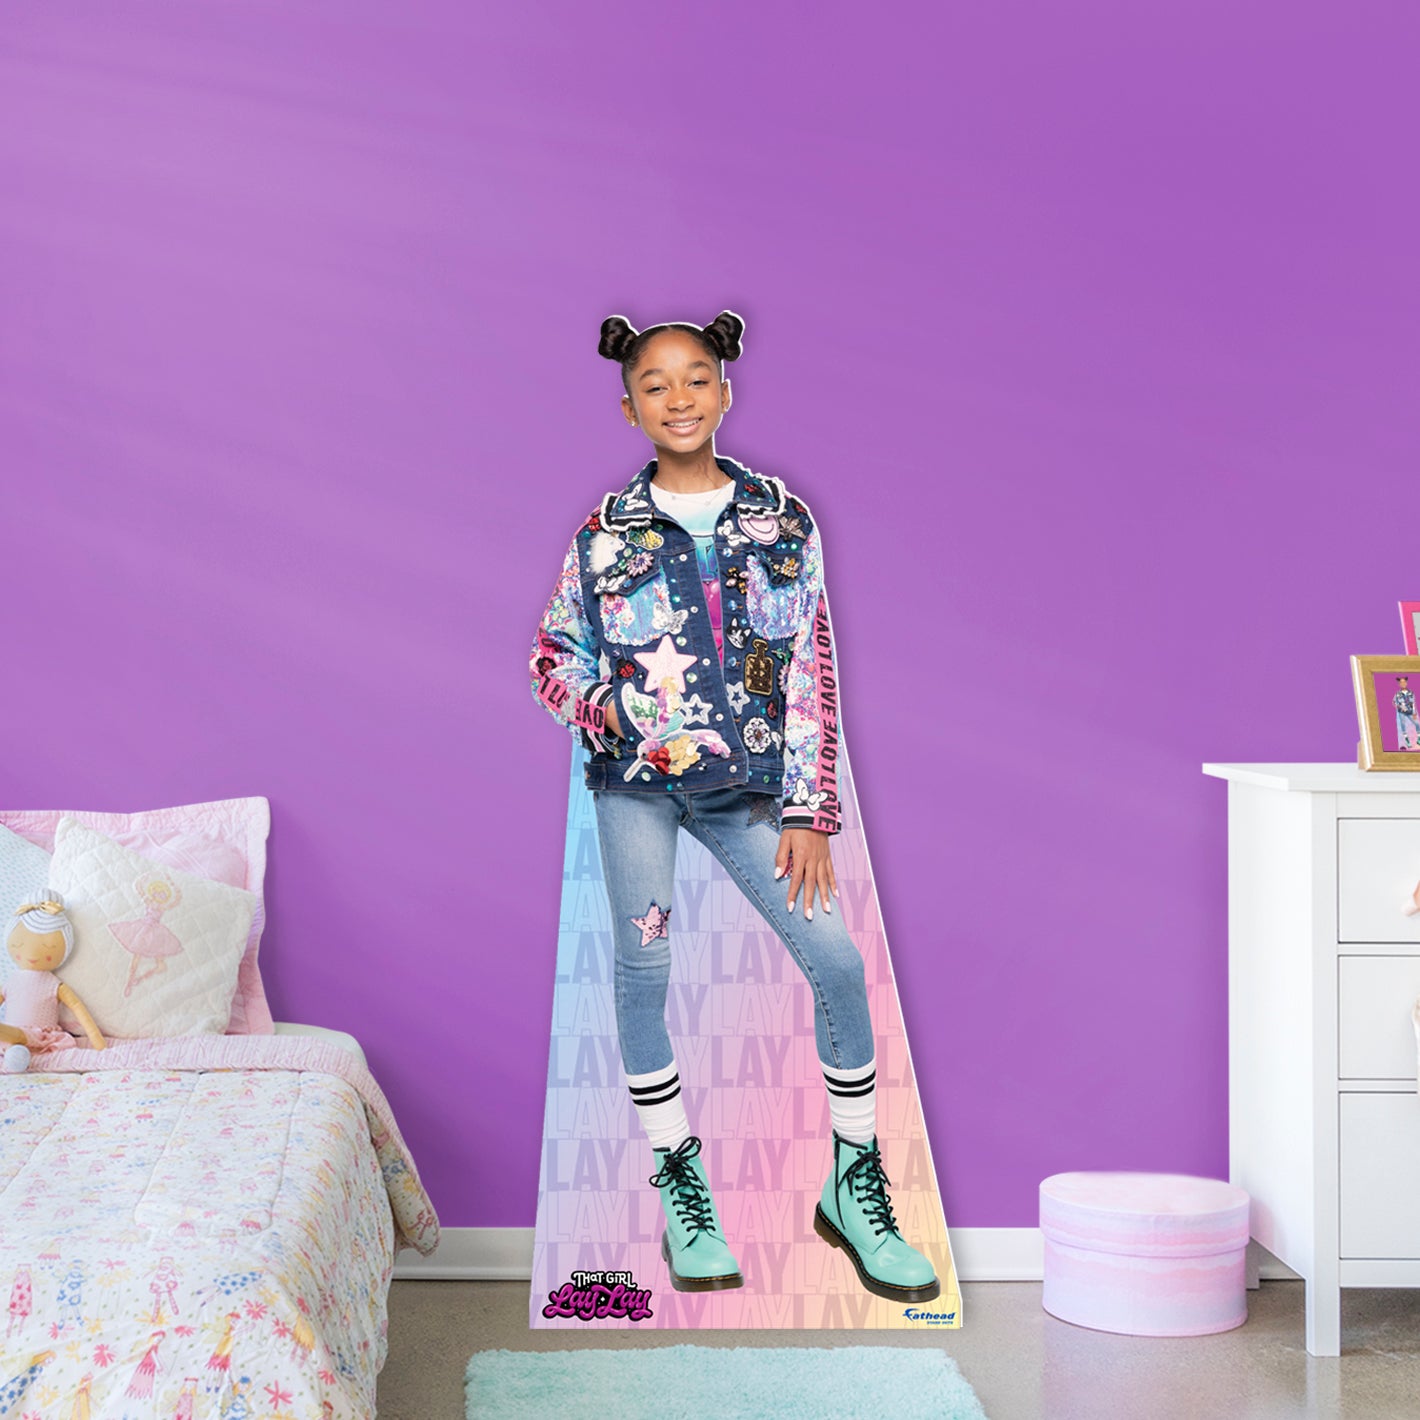 That Girl Lay Lay: Confident Life-Size Foam Core Cutout - Officially Licensed Nickelodeon Stand Out